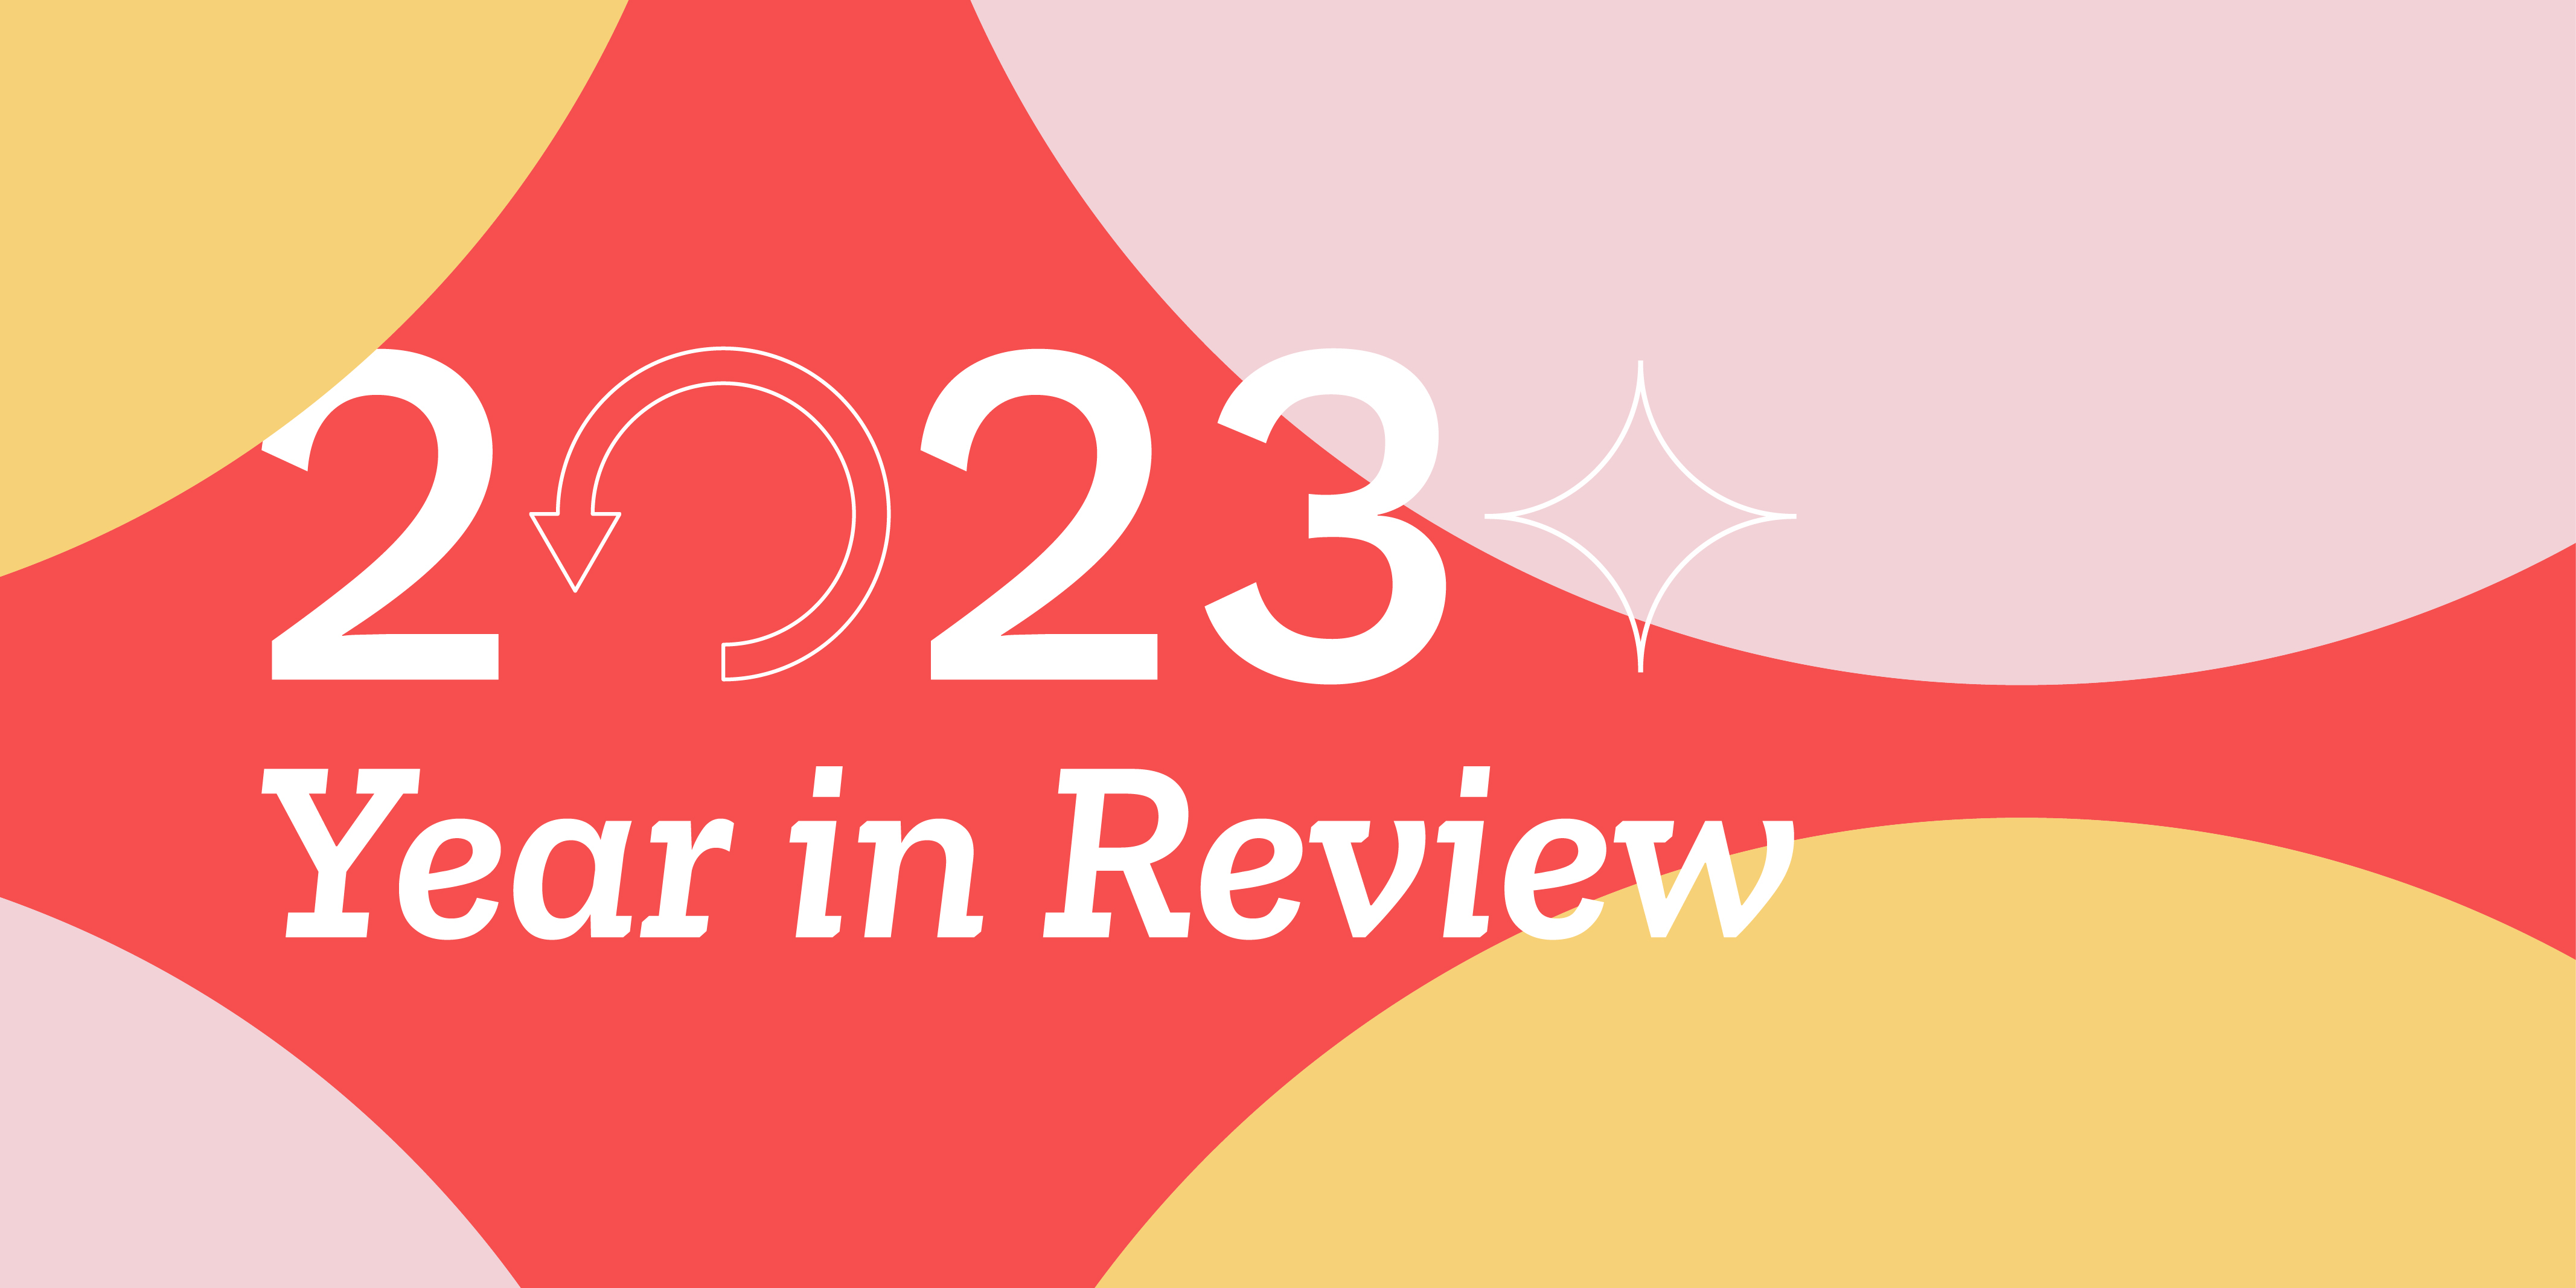 Kaleyra : 2023 Year-in-review